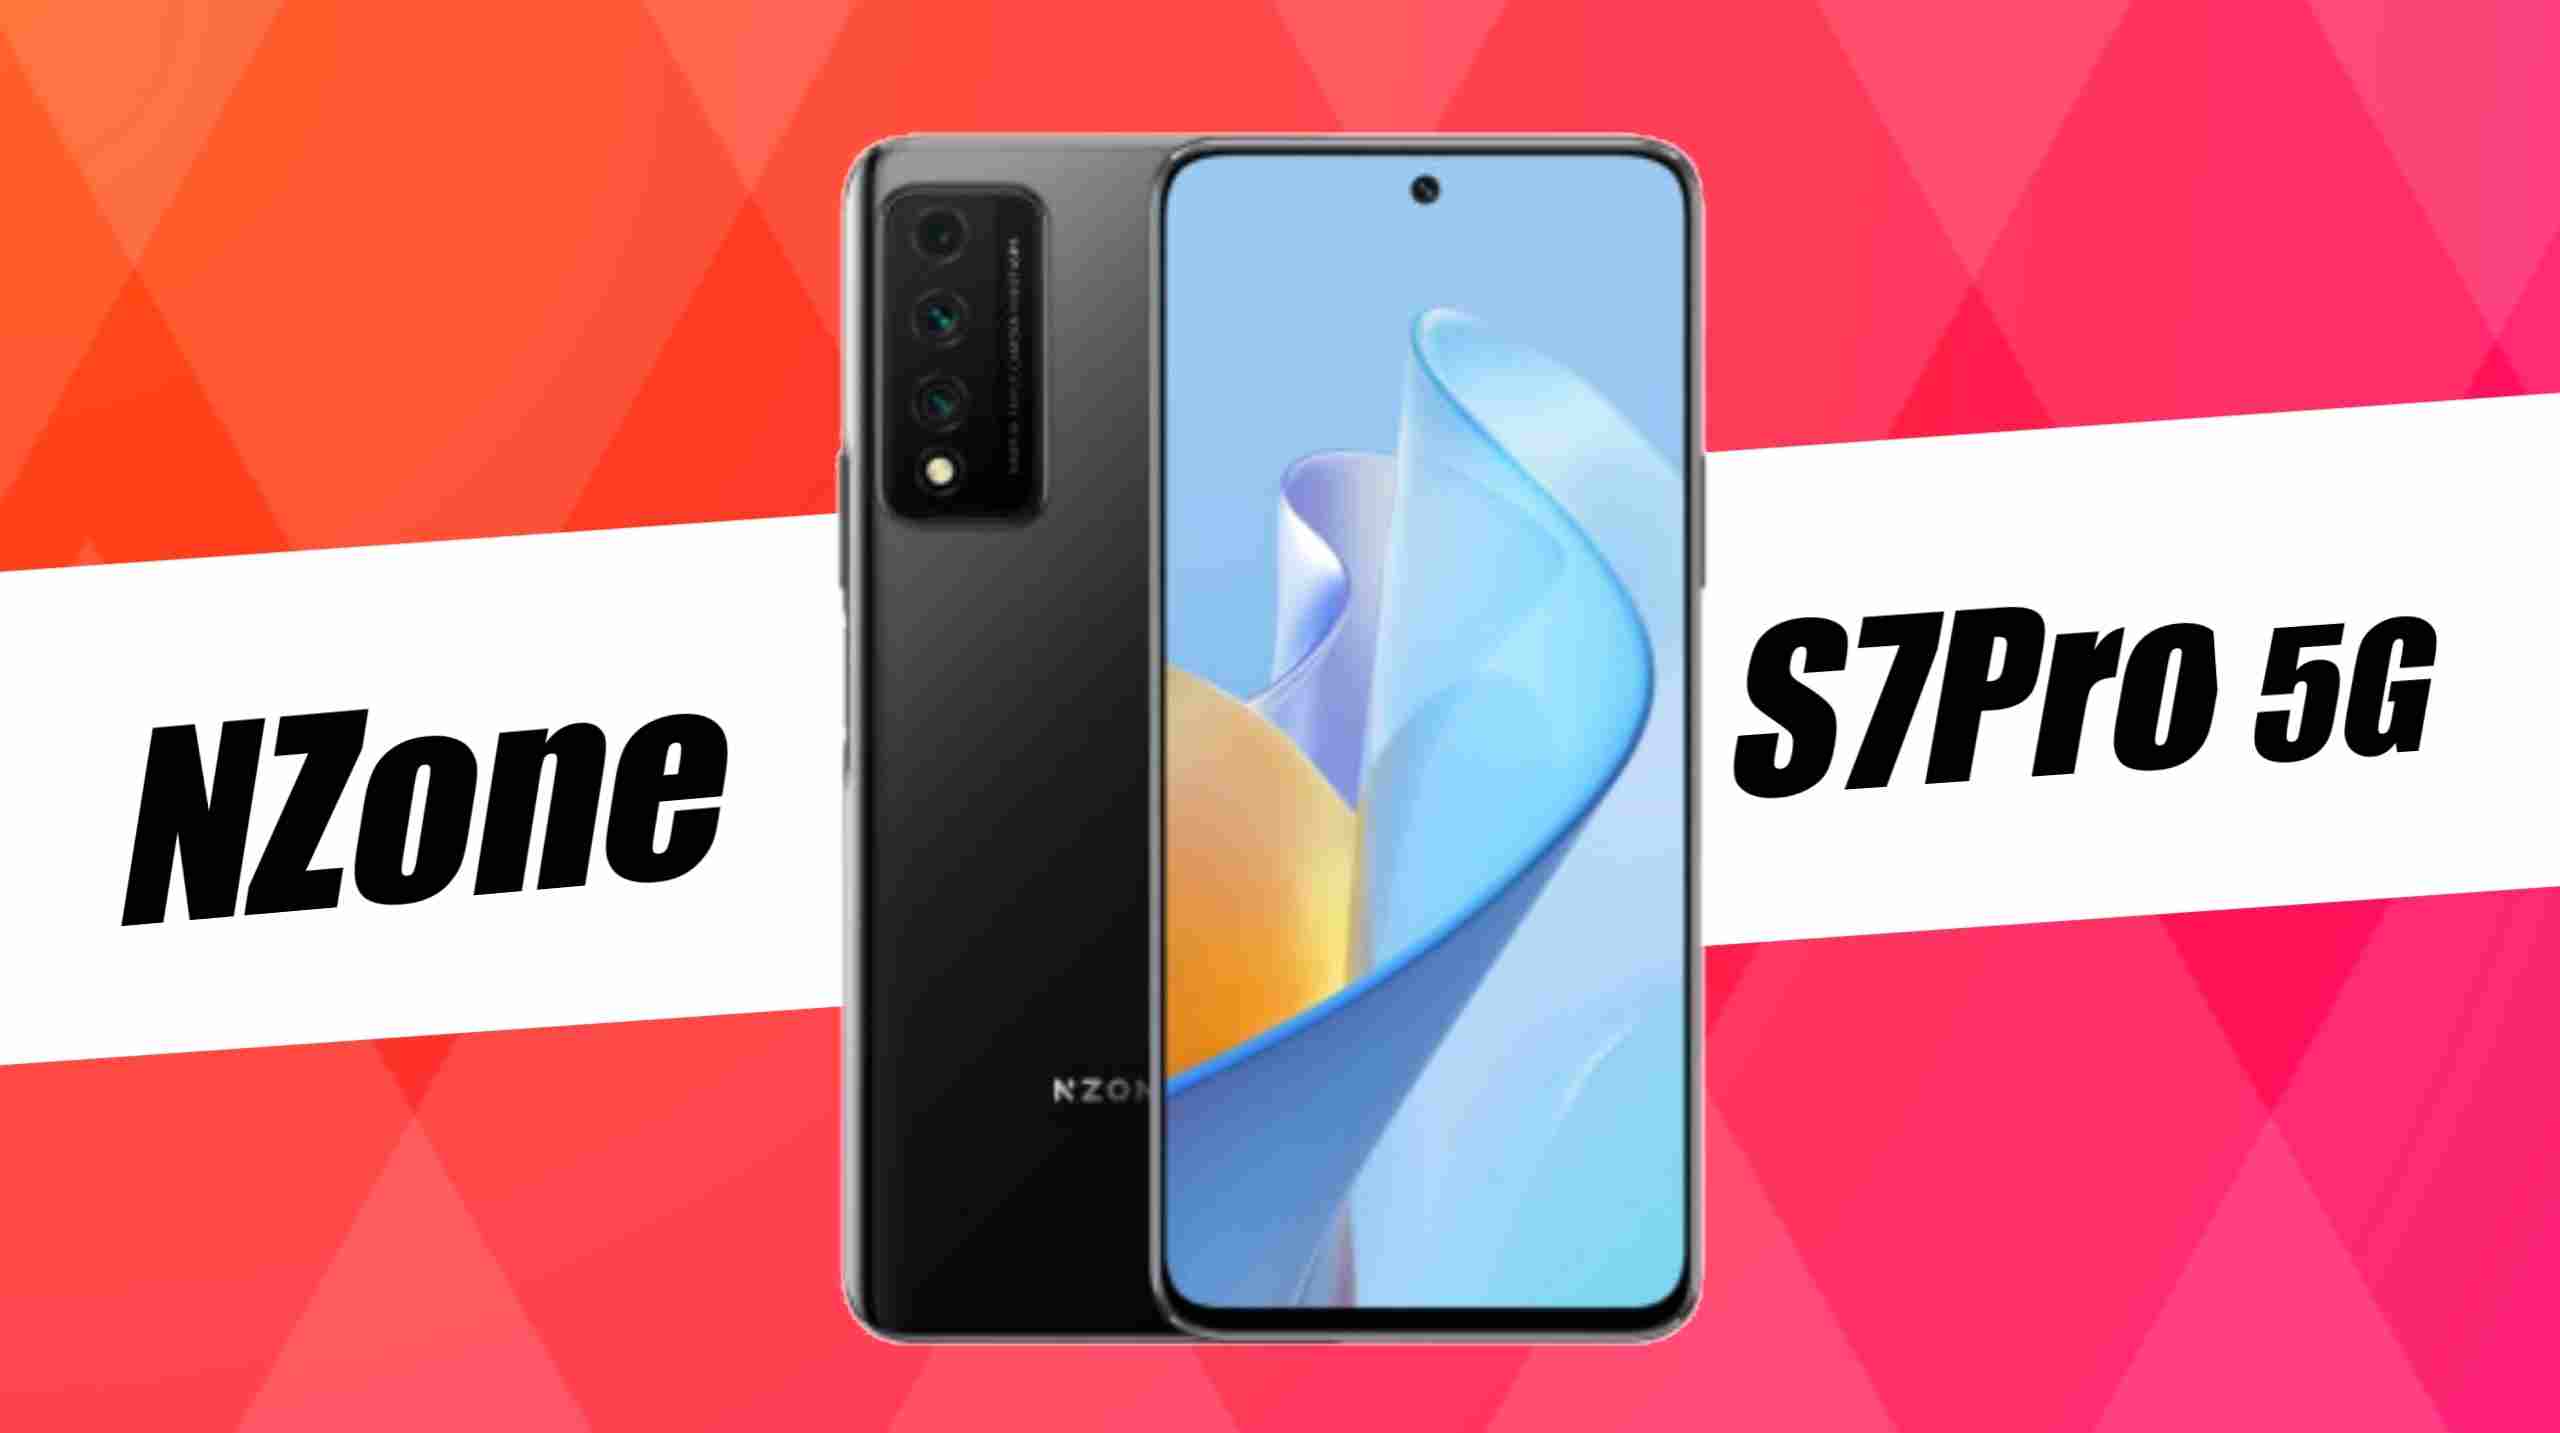 NZone S7 Pro 5G with MediaTek Dimensity 720, 64MP triple rear cameras launched: Price, Specifications